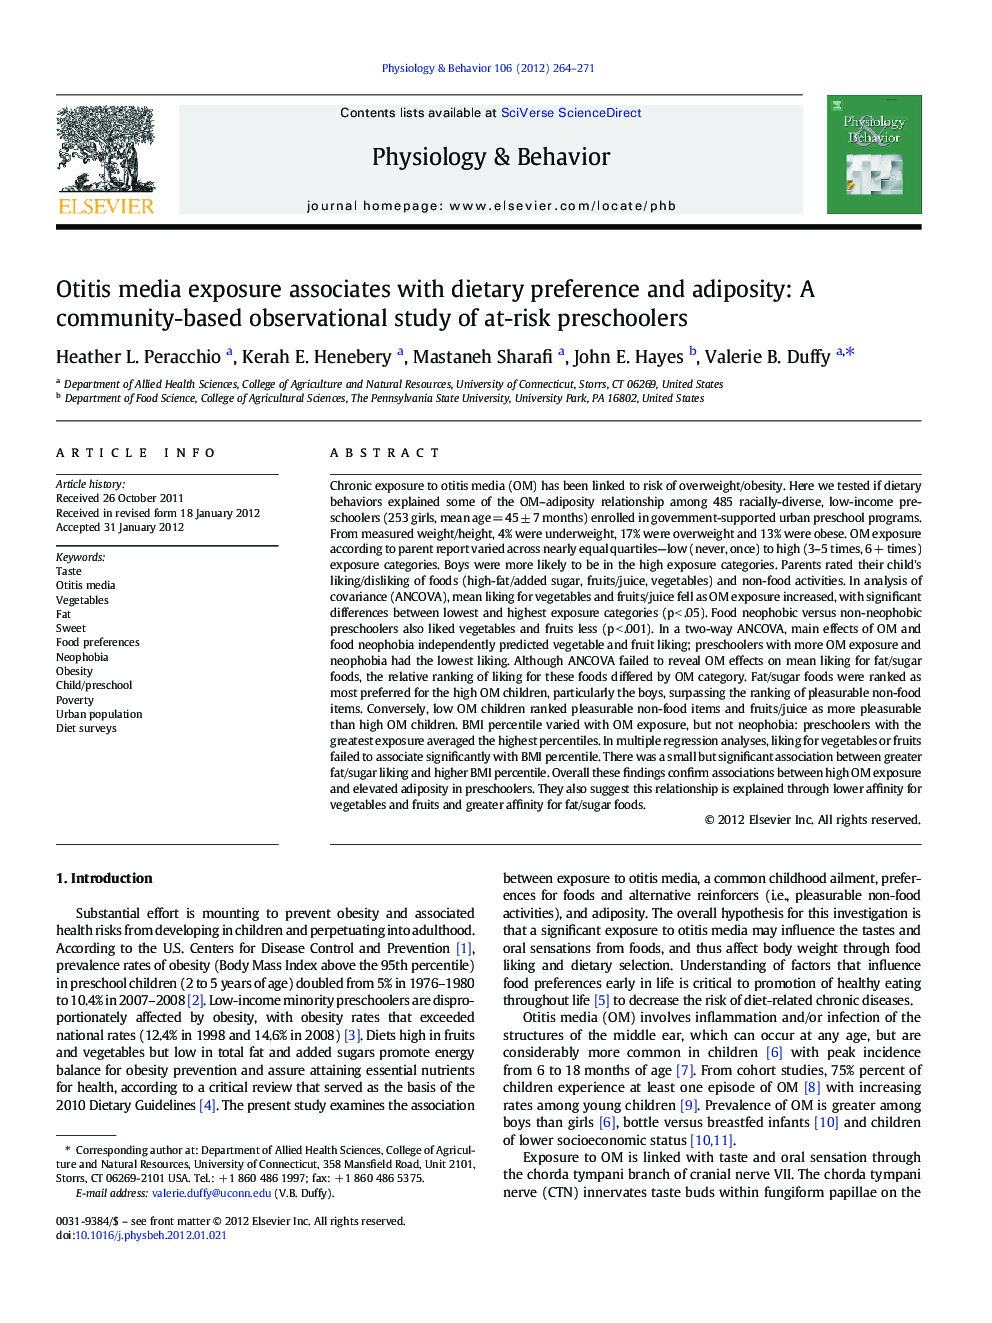 Otitis media exposure associates with dietary preference and adiposity: A community-based observational study of at-risk preschoolers